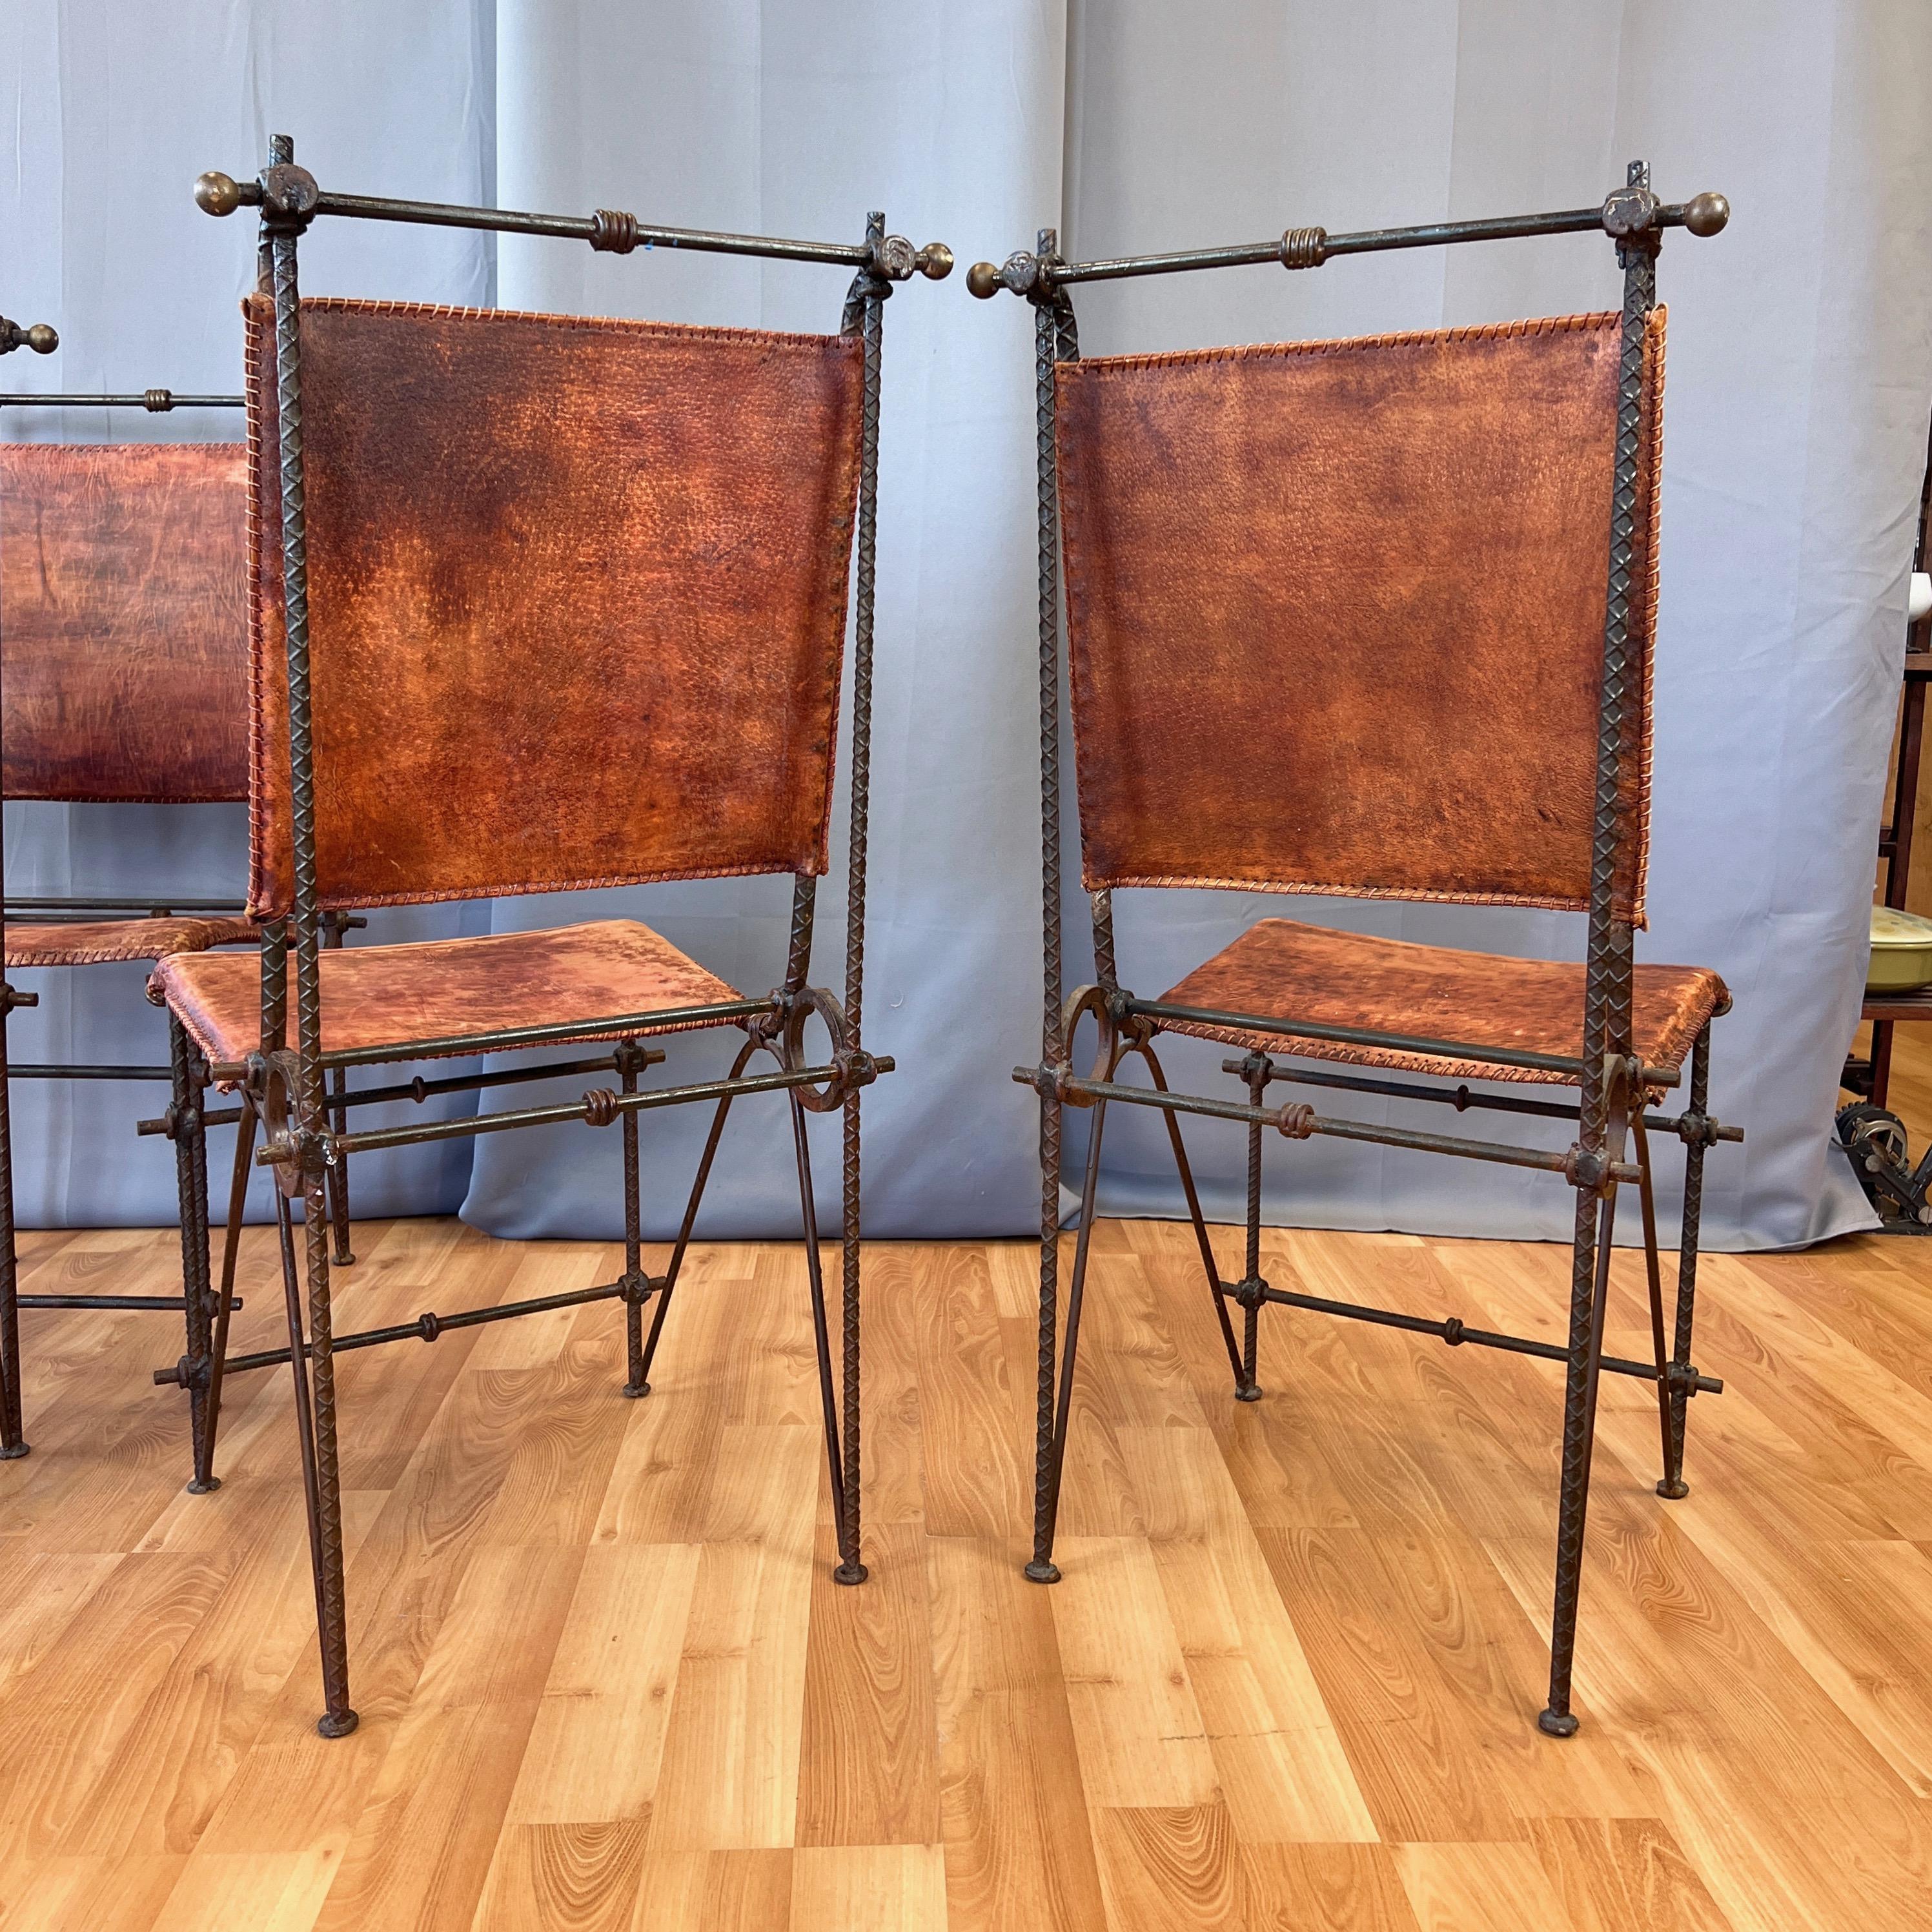 Set of 4 Ilana Goor-Attributed Brutalist Metal and Leather Dining Chairs, 1980 For Sale 4